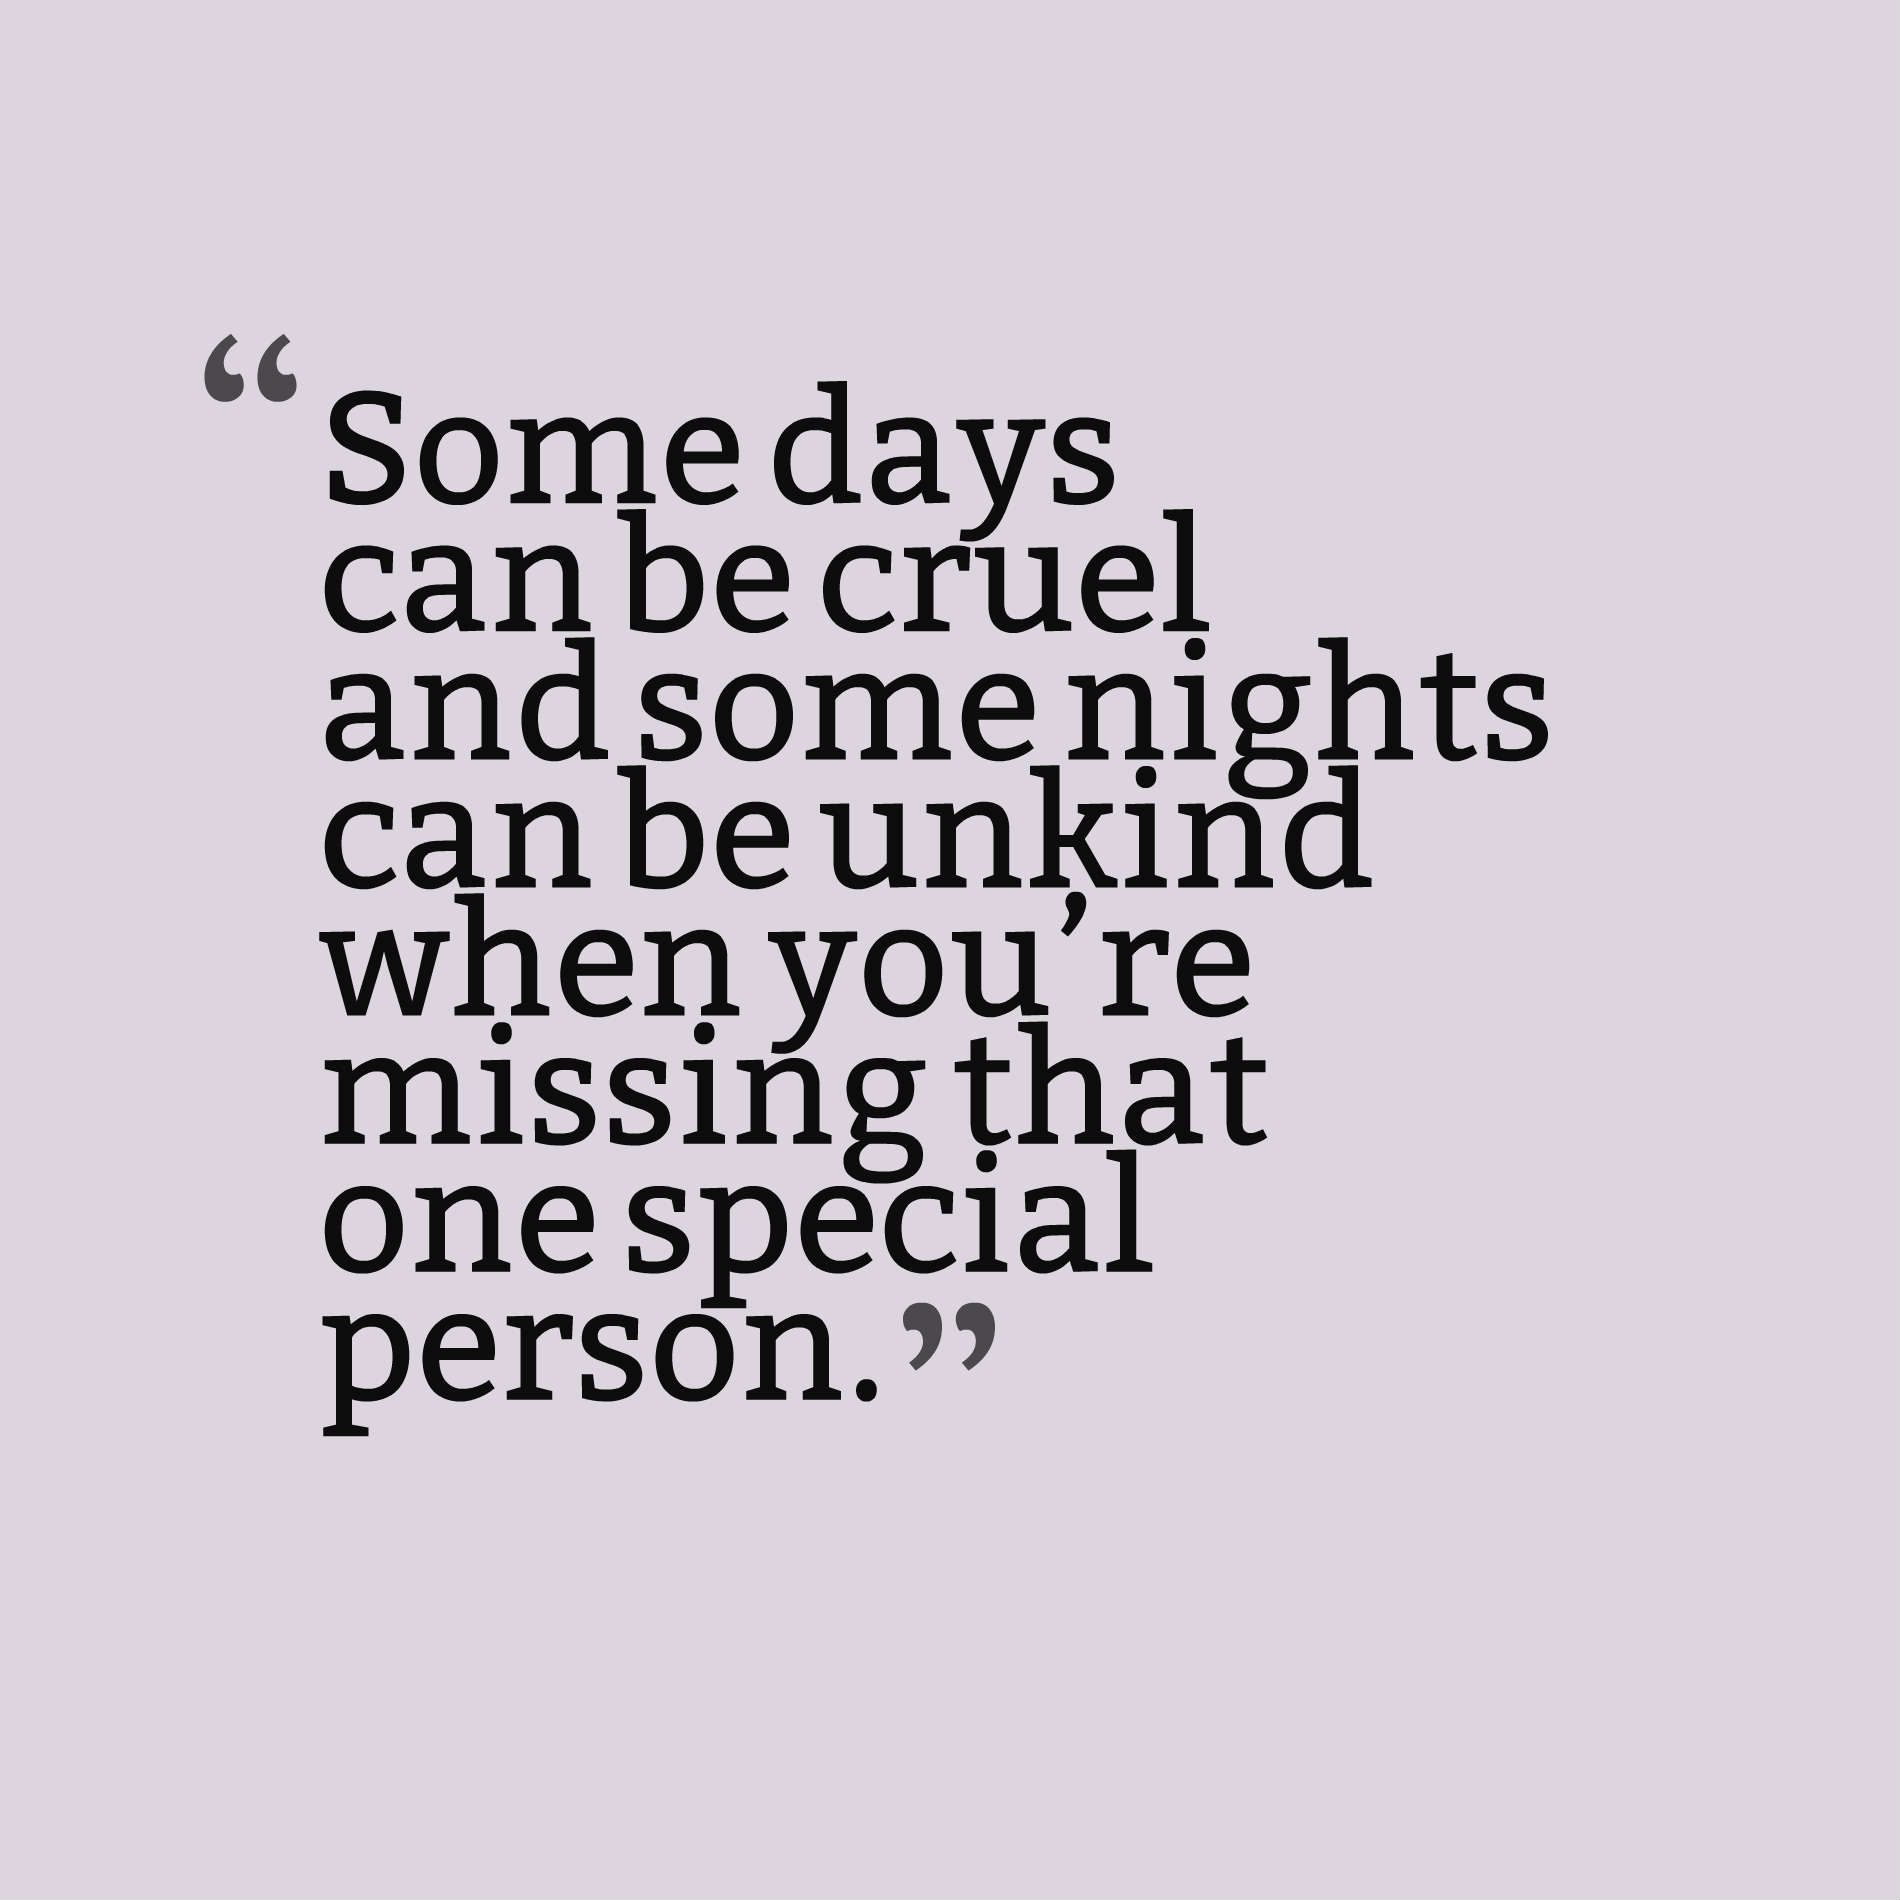 Some days can be cruel and some nights can be unkind when you’re missing that one special person.